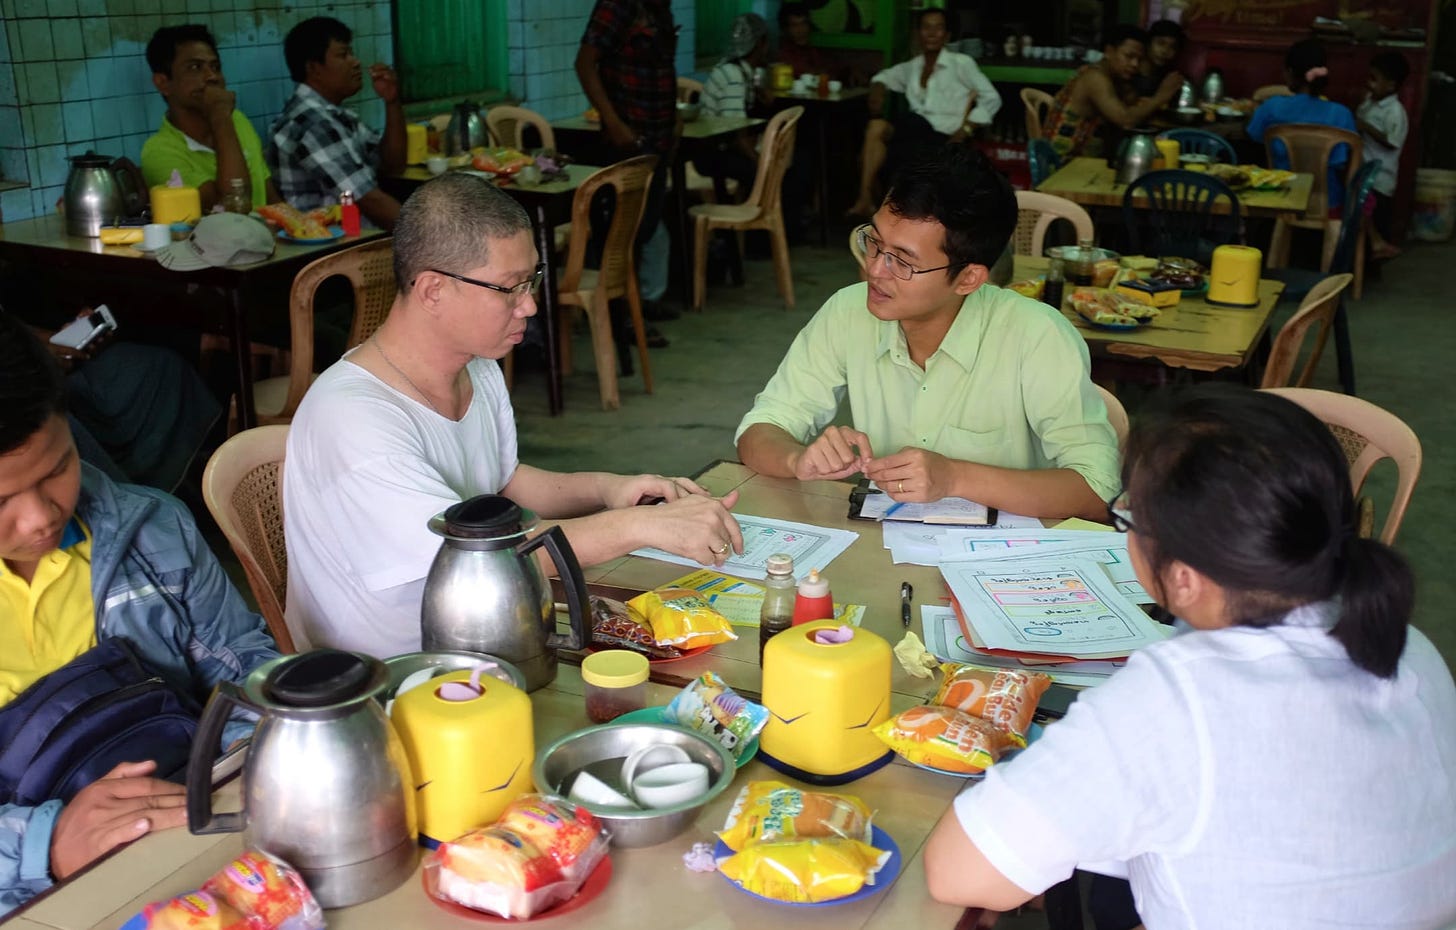 Four people sit at a table featuring packaged snacks, bottles, coffee pots, and letter-size papers, in an informal restaurant. One man, wearing a light-green shirt, is speaking with another man, in a white t-shirt, who is pointing to a paper in front of him.  Two other people are in the foreground, one looking down and one with her back turned.